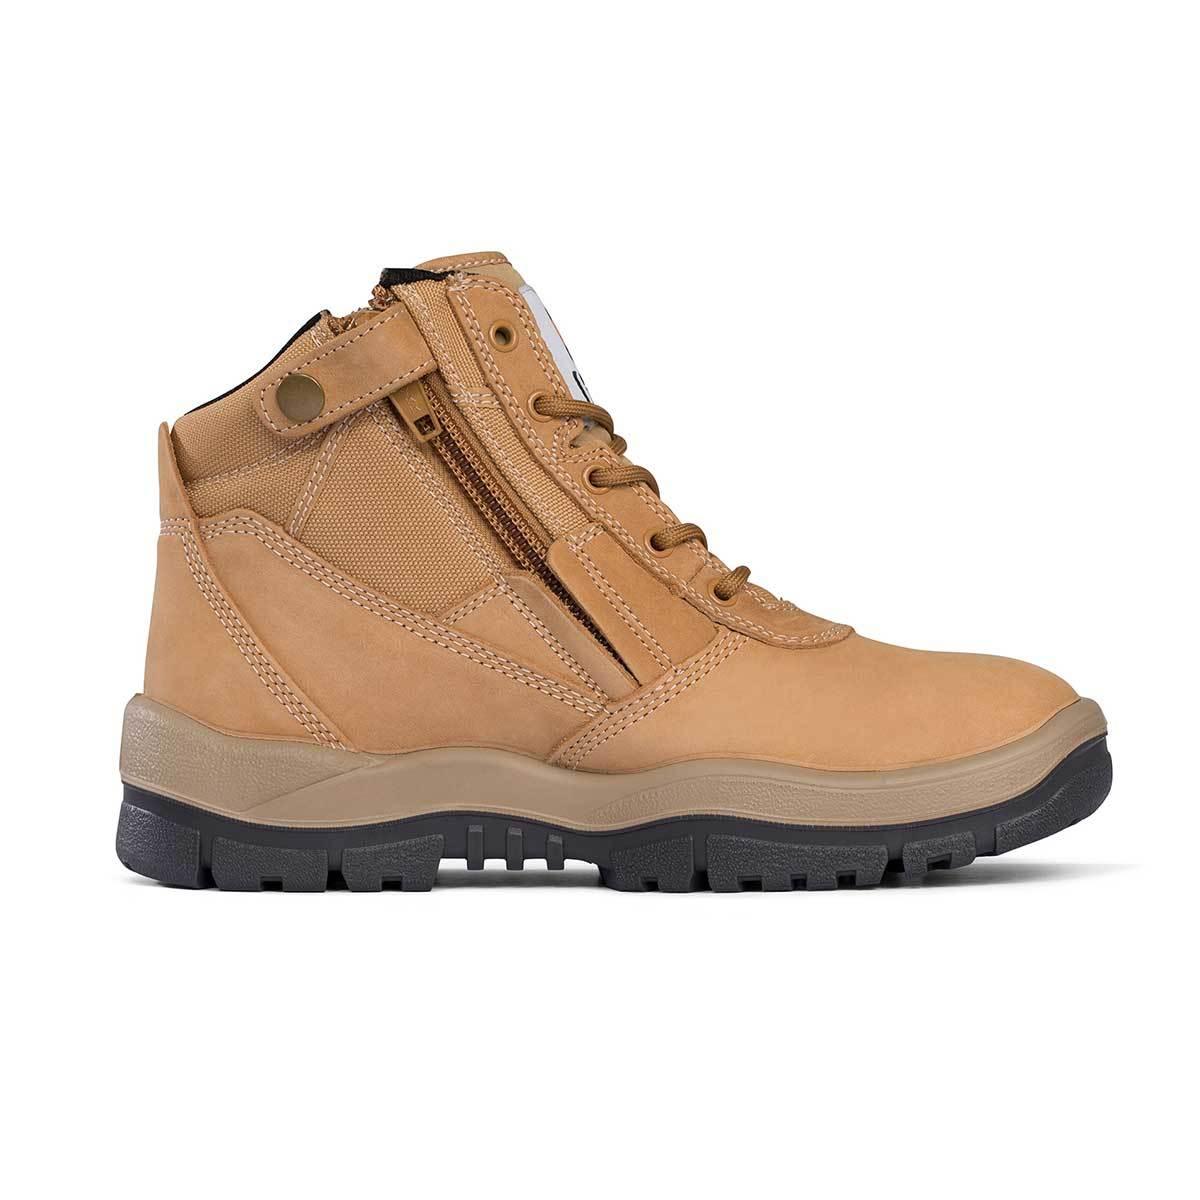 Mongrel Zipsider Non-Safety Soft Toe Work Boots - The Next Pair